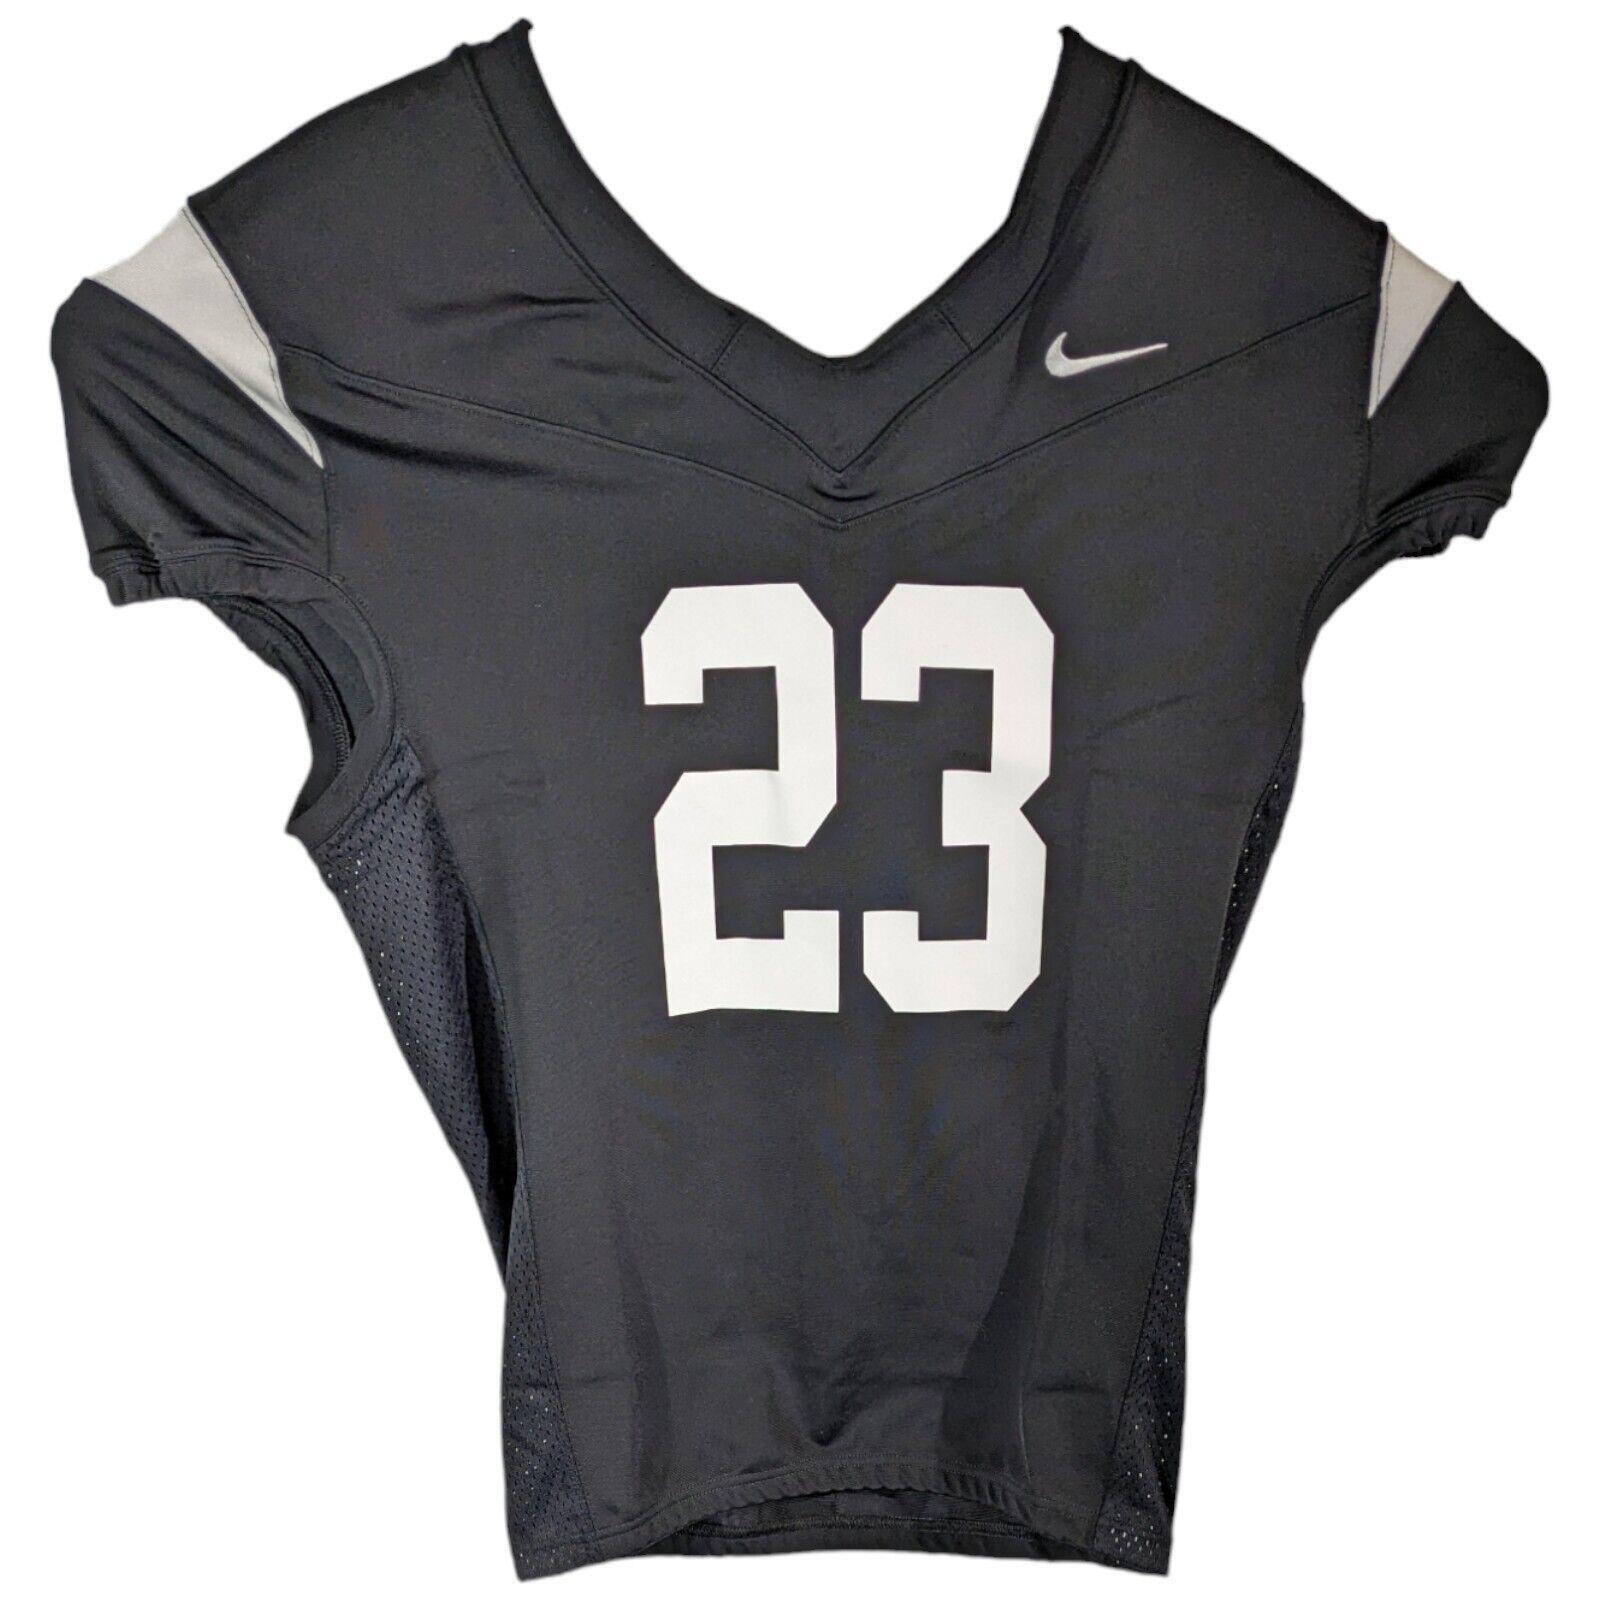 Primary image for Black Football Jersey #23 Nike Size L Large Practice Game Issue